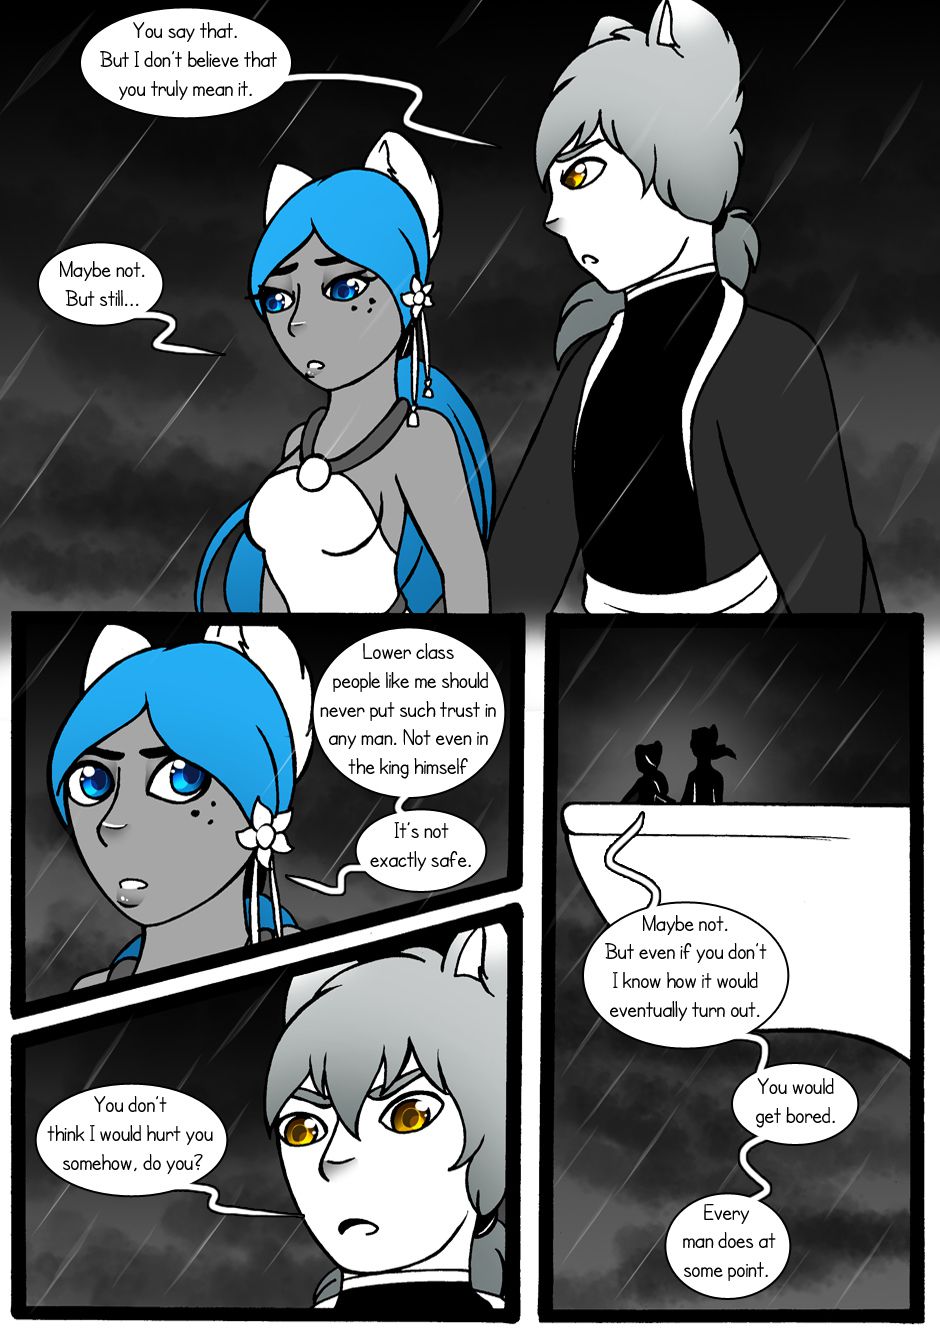 [Jeny-jen94] Between Kings and Queens [Ongoing] 121